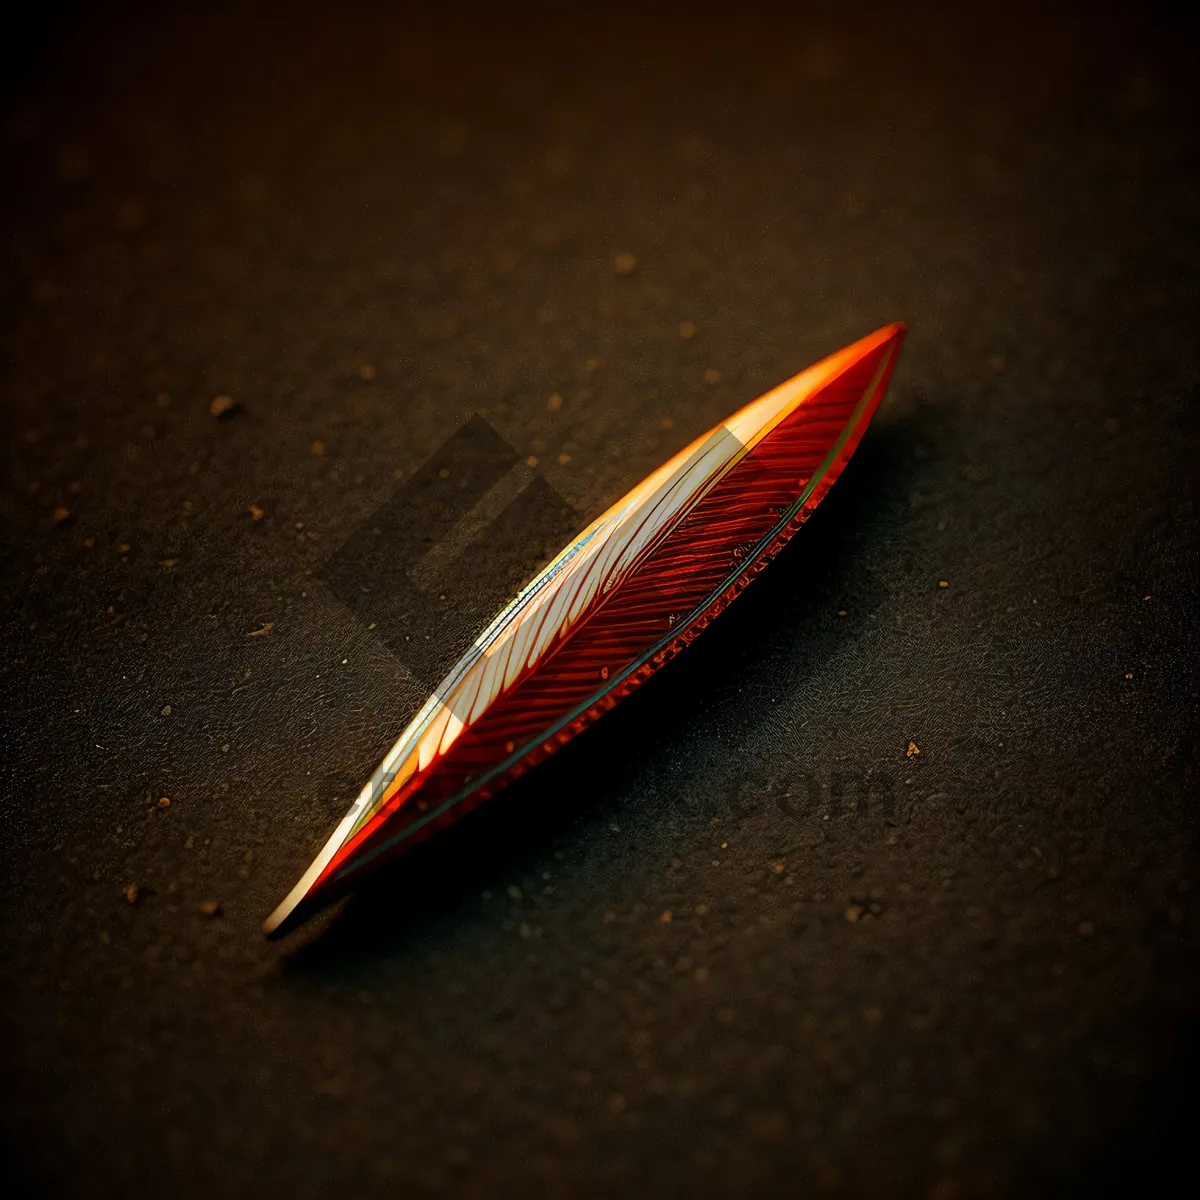 Picture of Insect perched on quill pen, surrounded by paper